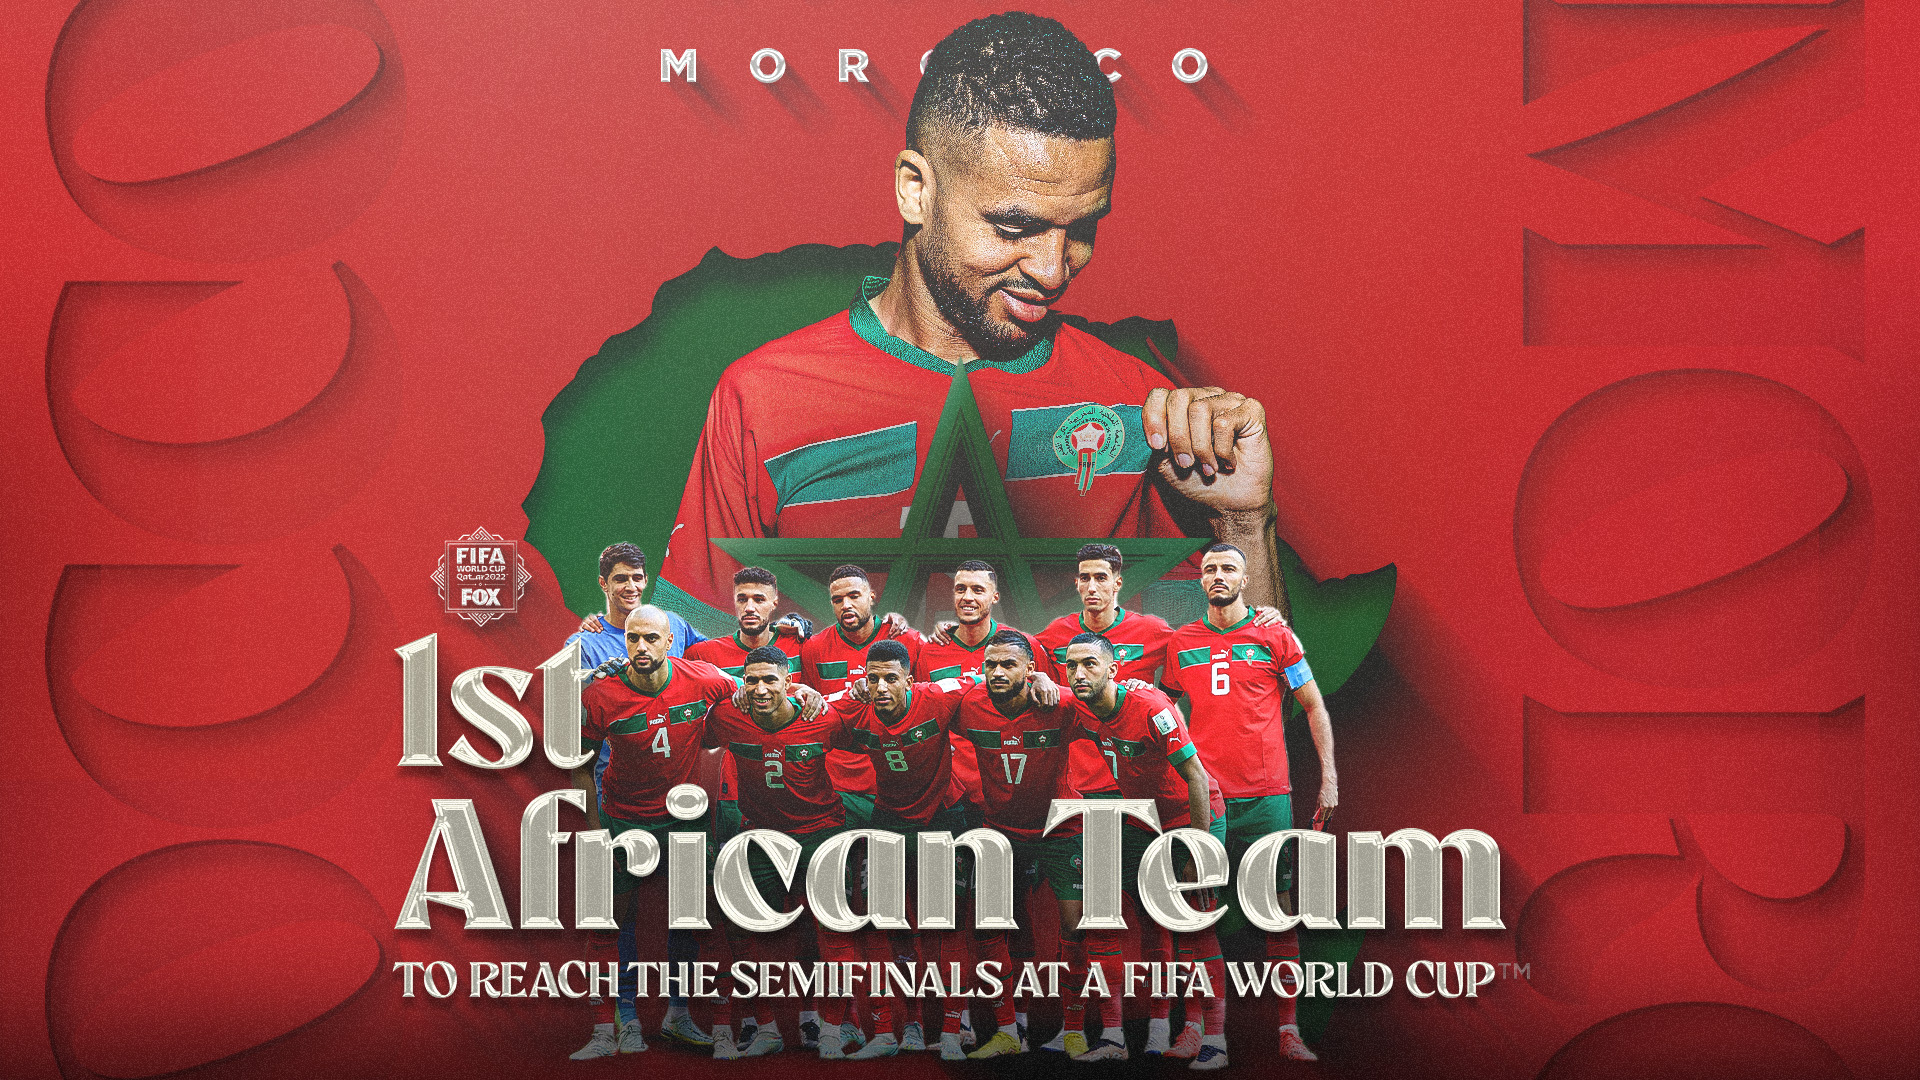 Morocco makes history as first African team to reach World Cup semis